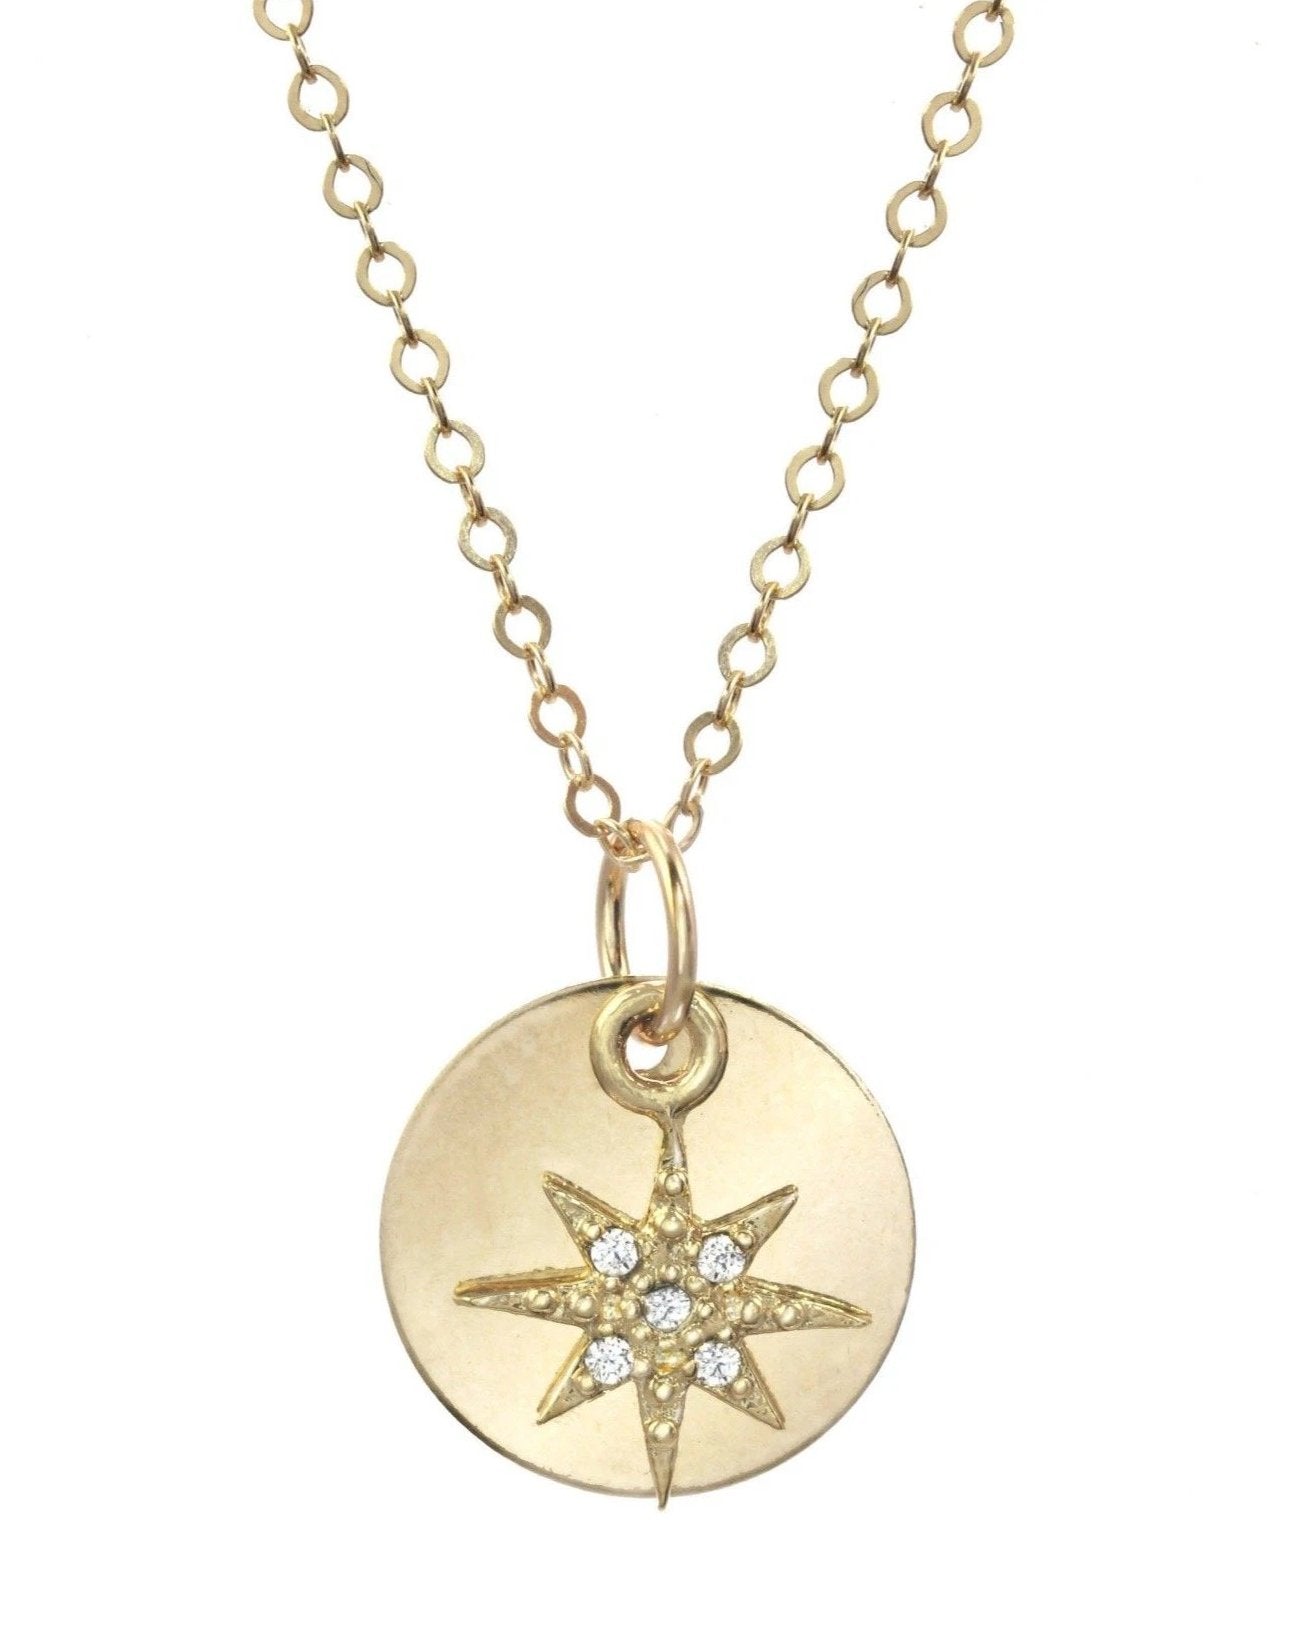 Adeena Necklace by KOZAKH. A 16 to 18 inch adjustable length necklace in 14K Gold Filled, featuring a coin charm and a Cubic Zirconia star charm.